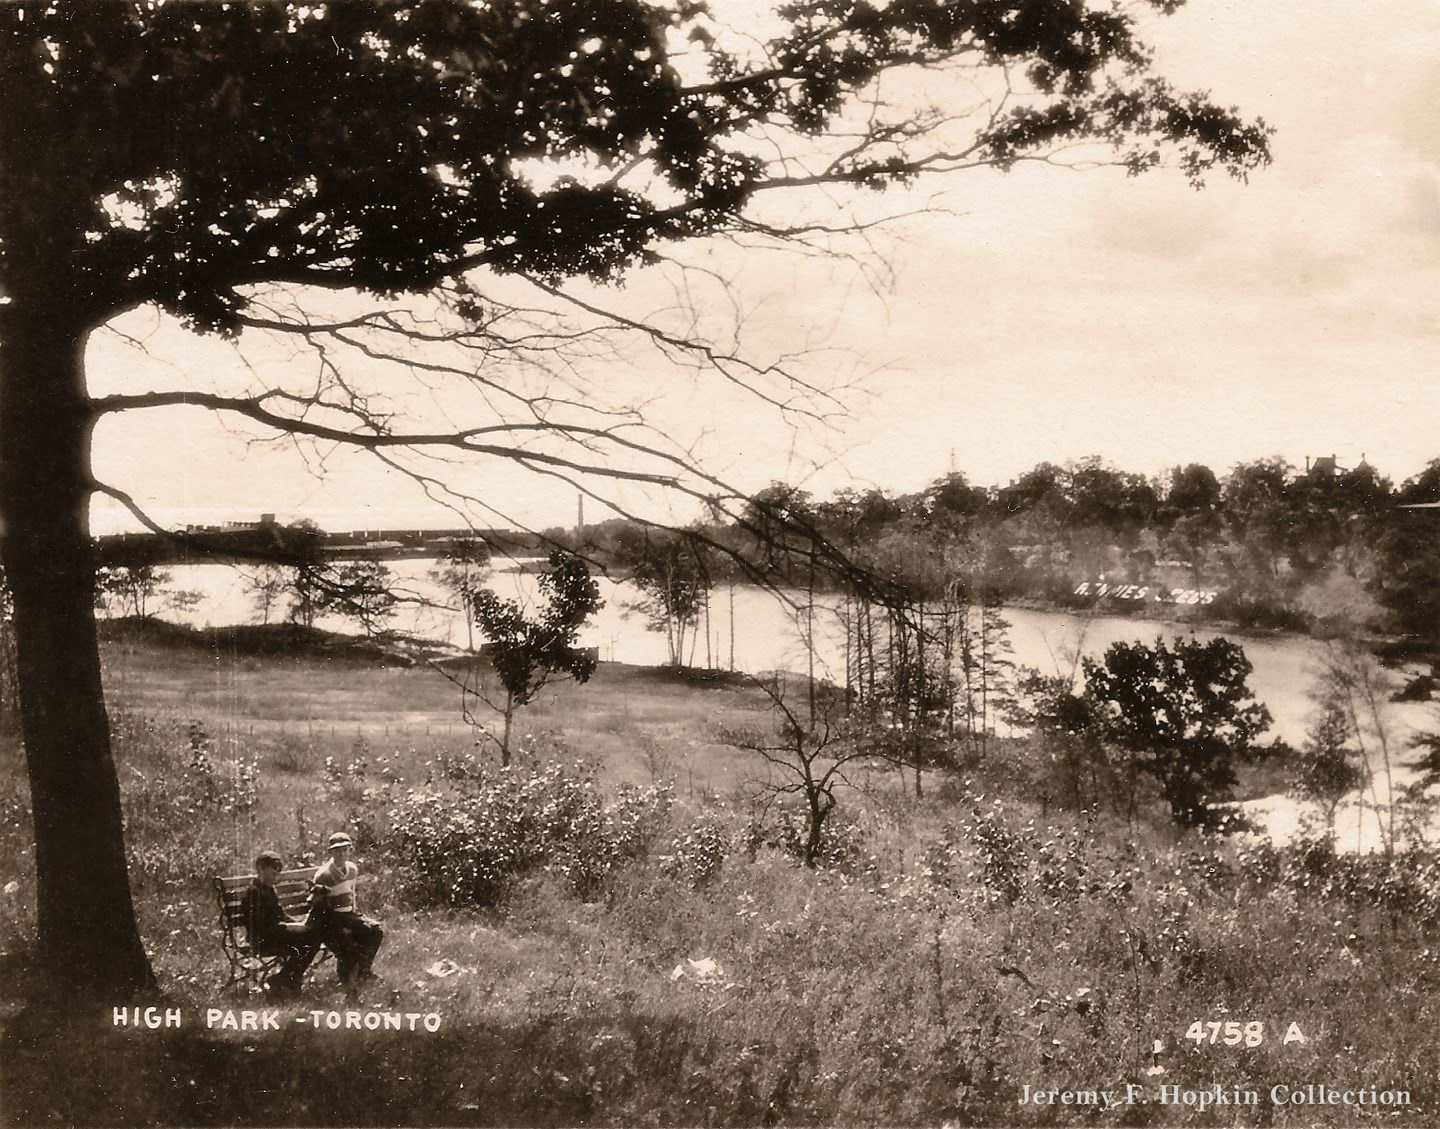 A scene in High Park, view looking west to the primary farm of the Rennie Seed company, 1920.